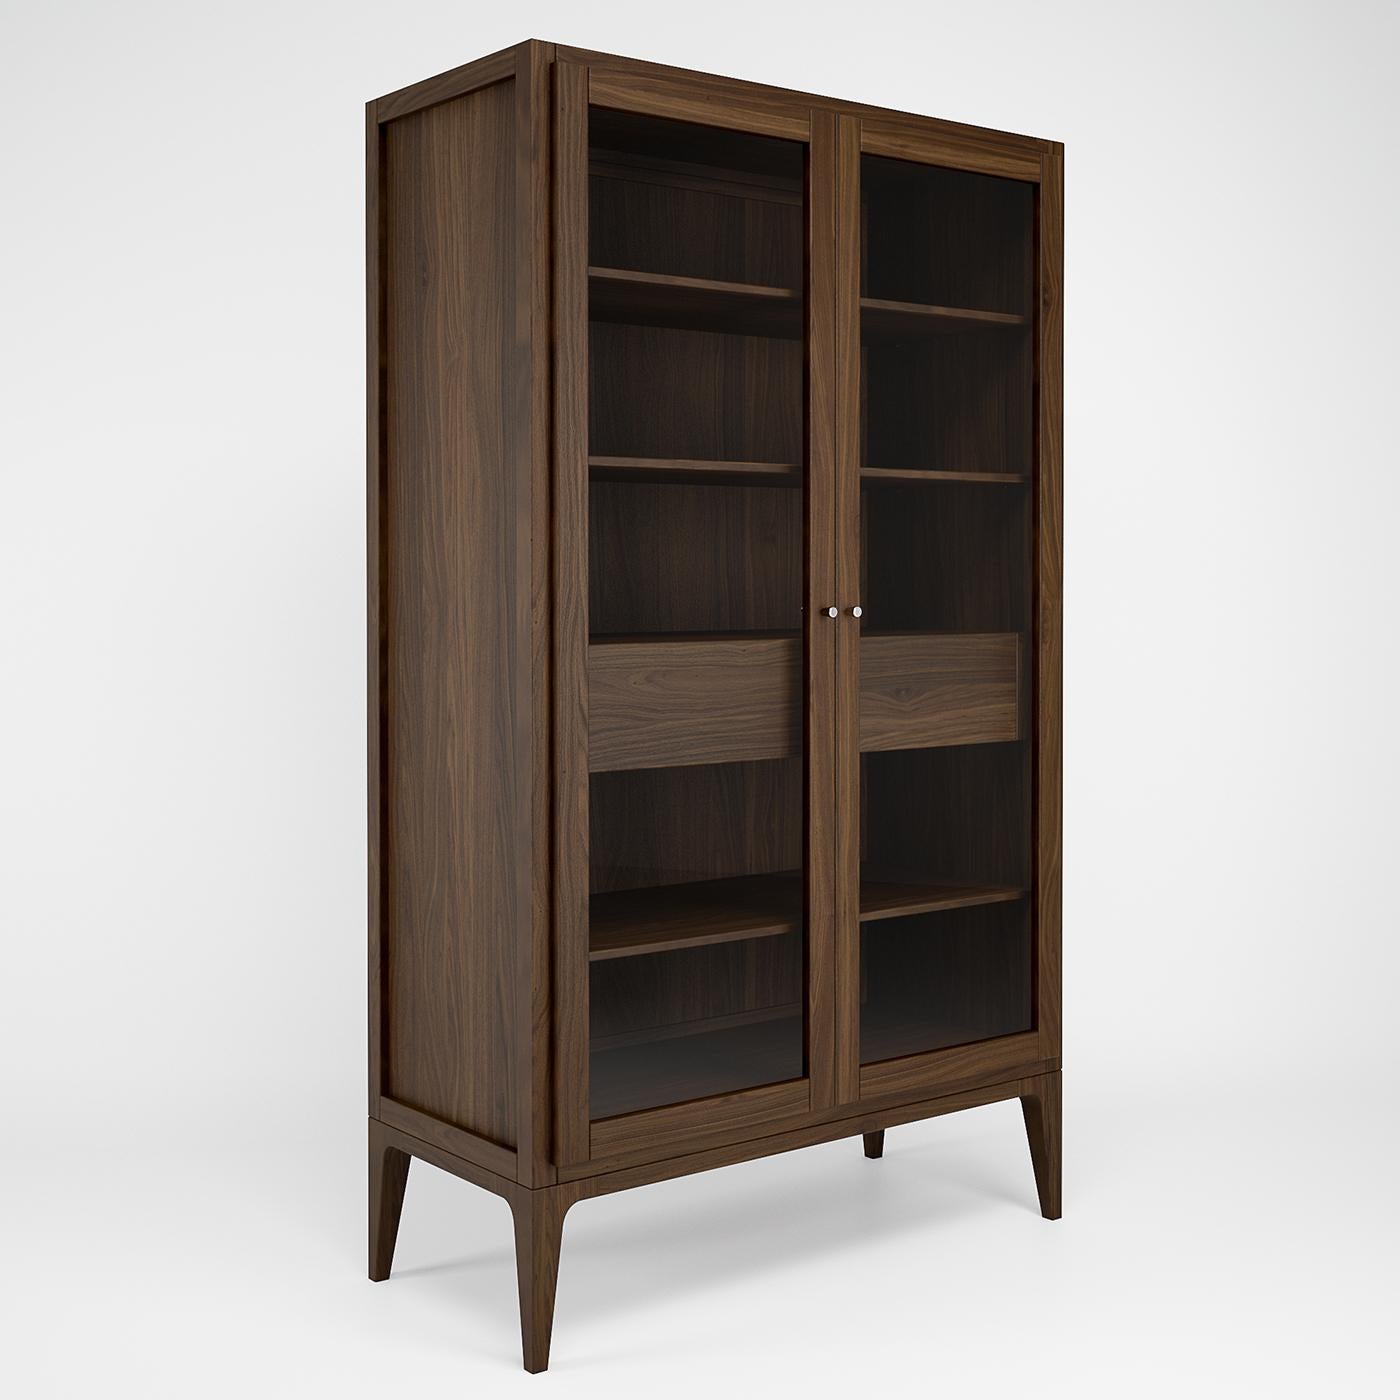 Handcrafted of solid American walnut with meticulous attention to detail, this remarkable display cabinet is Italian finesse epitomized. Showcasing a grand, linear silhouette, the deliberate lack of ornate detailing lets the warm and rich wood tones